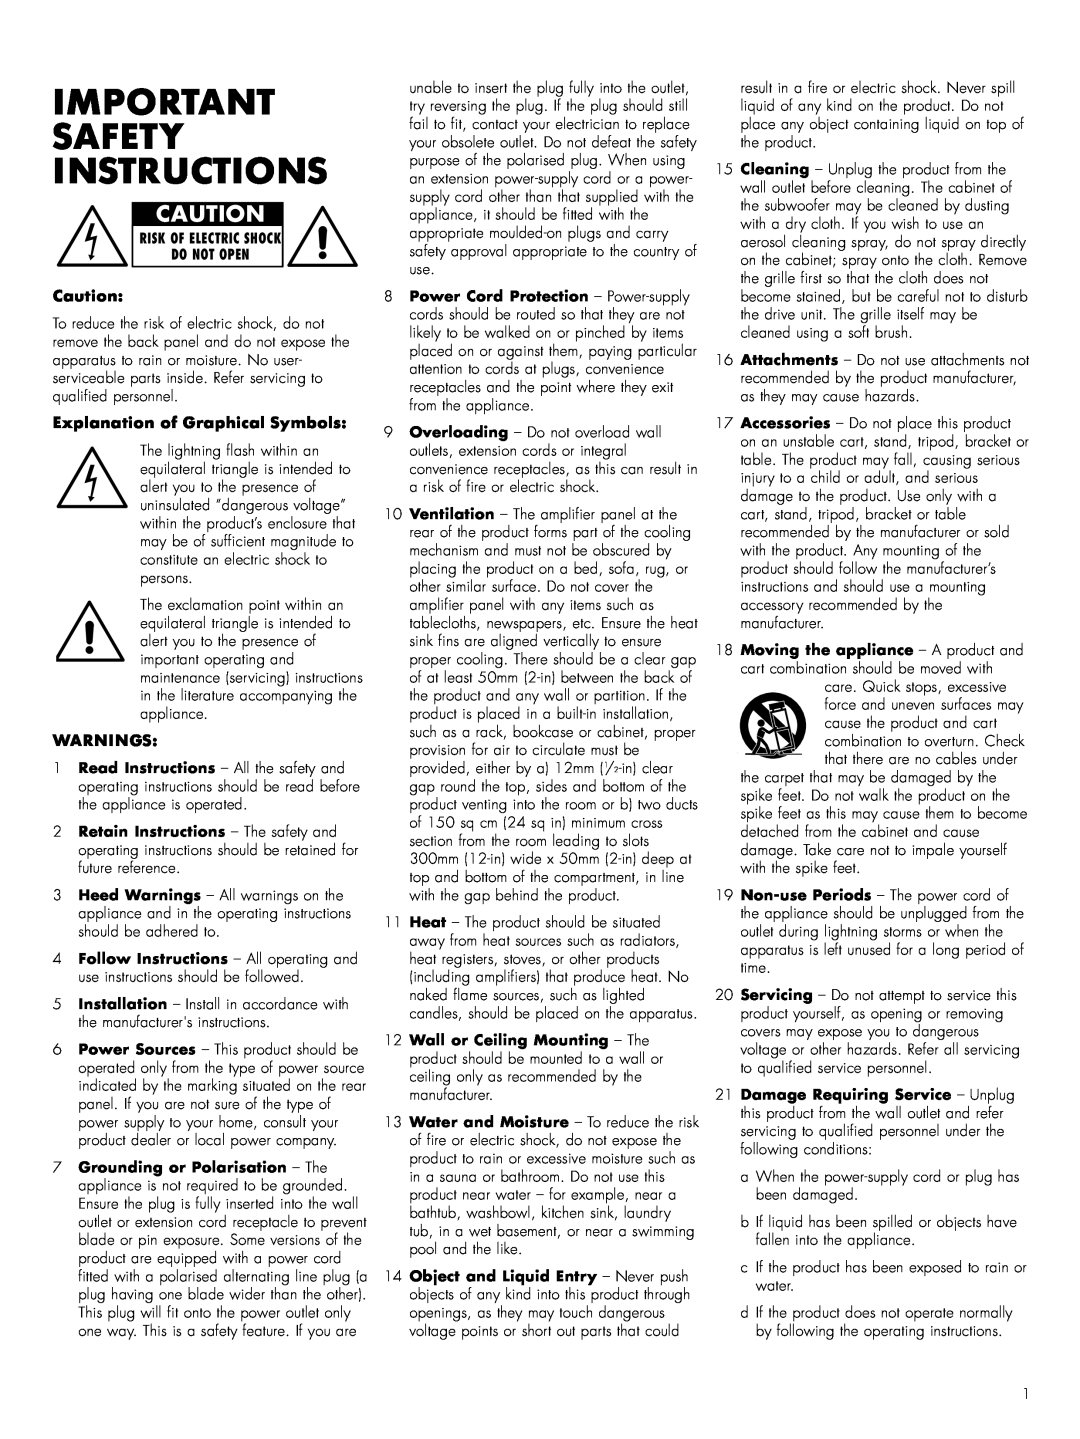 Bowers & Wilkins ASWCM owner manual Important Safety Instructions, Explanation of Graphical Symbols, Warnings 